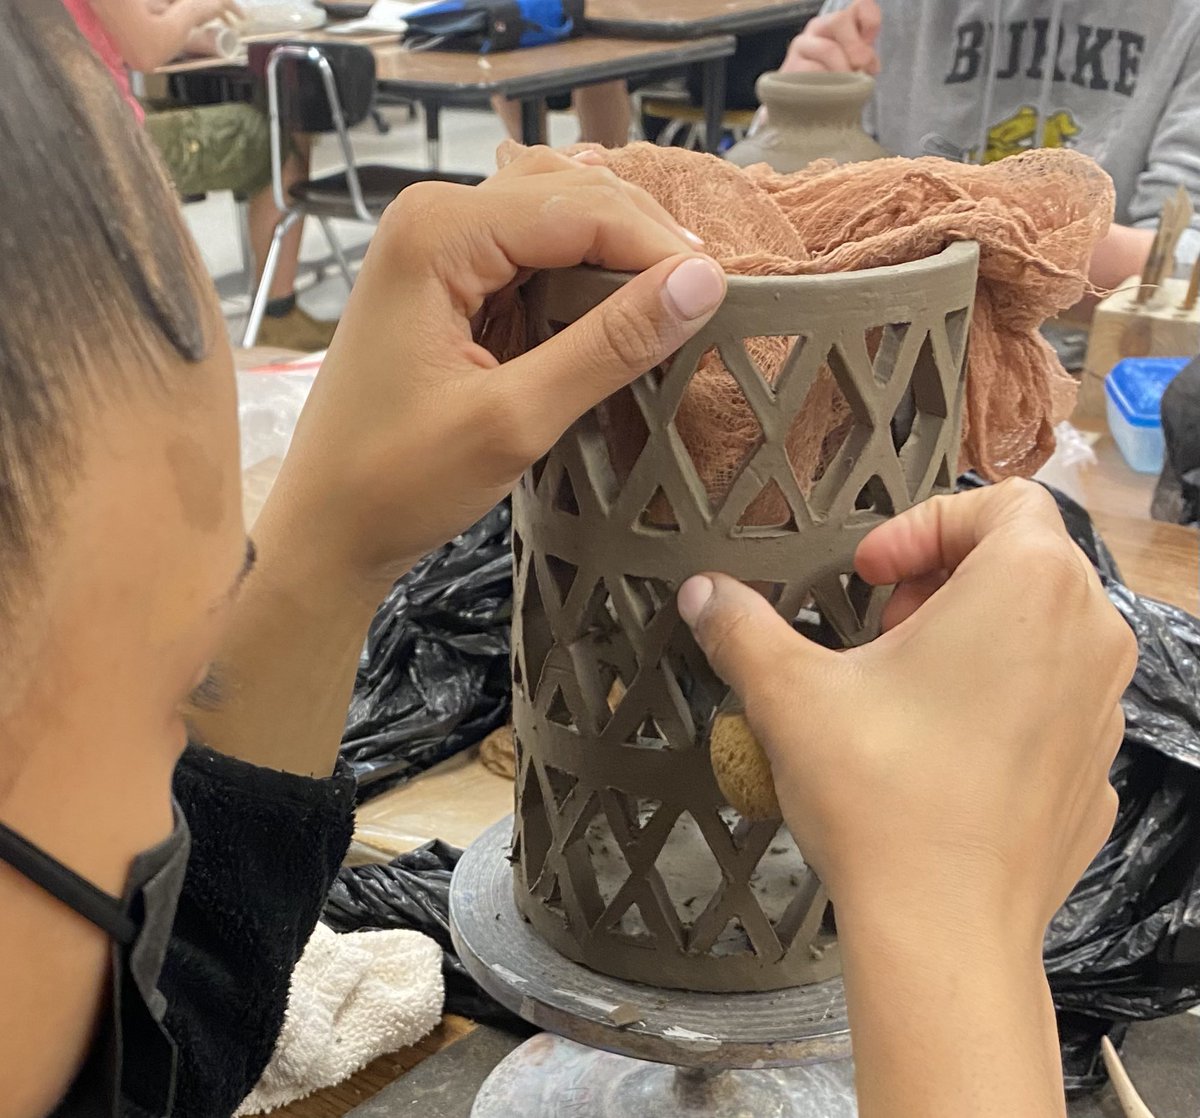 Beautiful things happening in the pottery room! #ops_burke #mudpuppies #pottery #practicepracticepractice #takerisks #bebrave